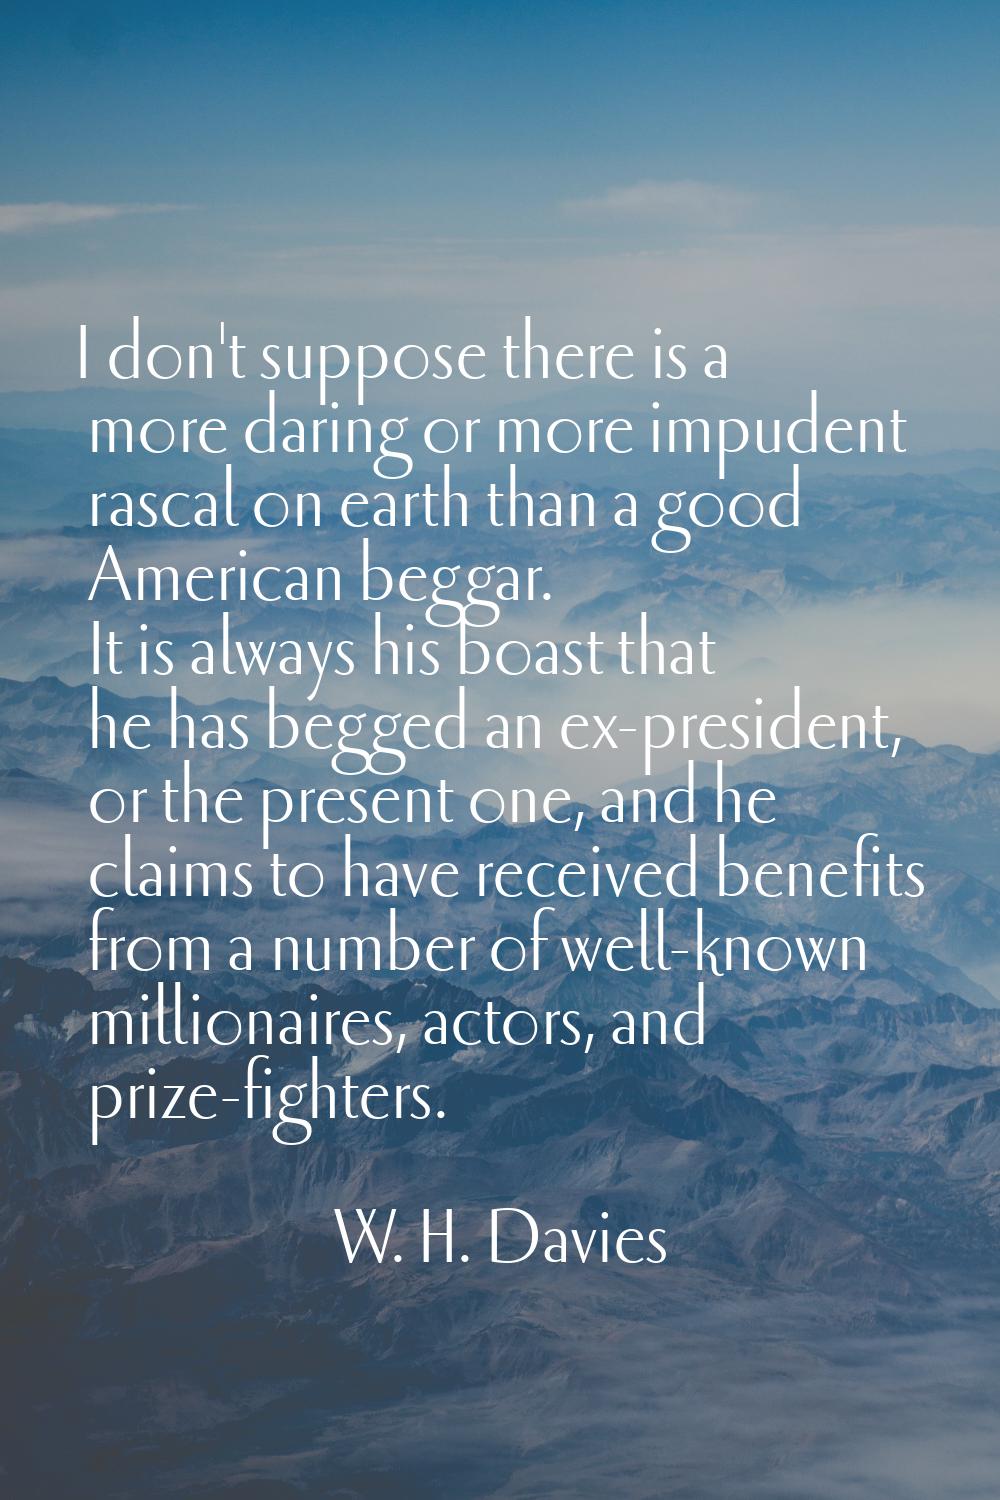 I don't suppose there is a more daring or more impudent rascal on earth than a good American beggar